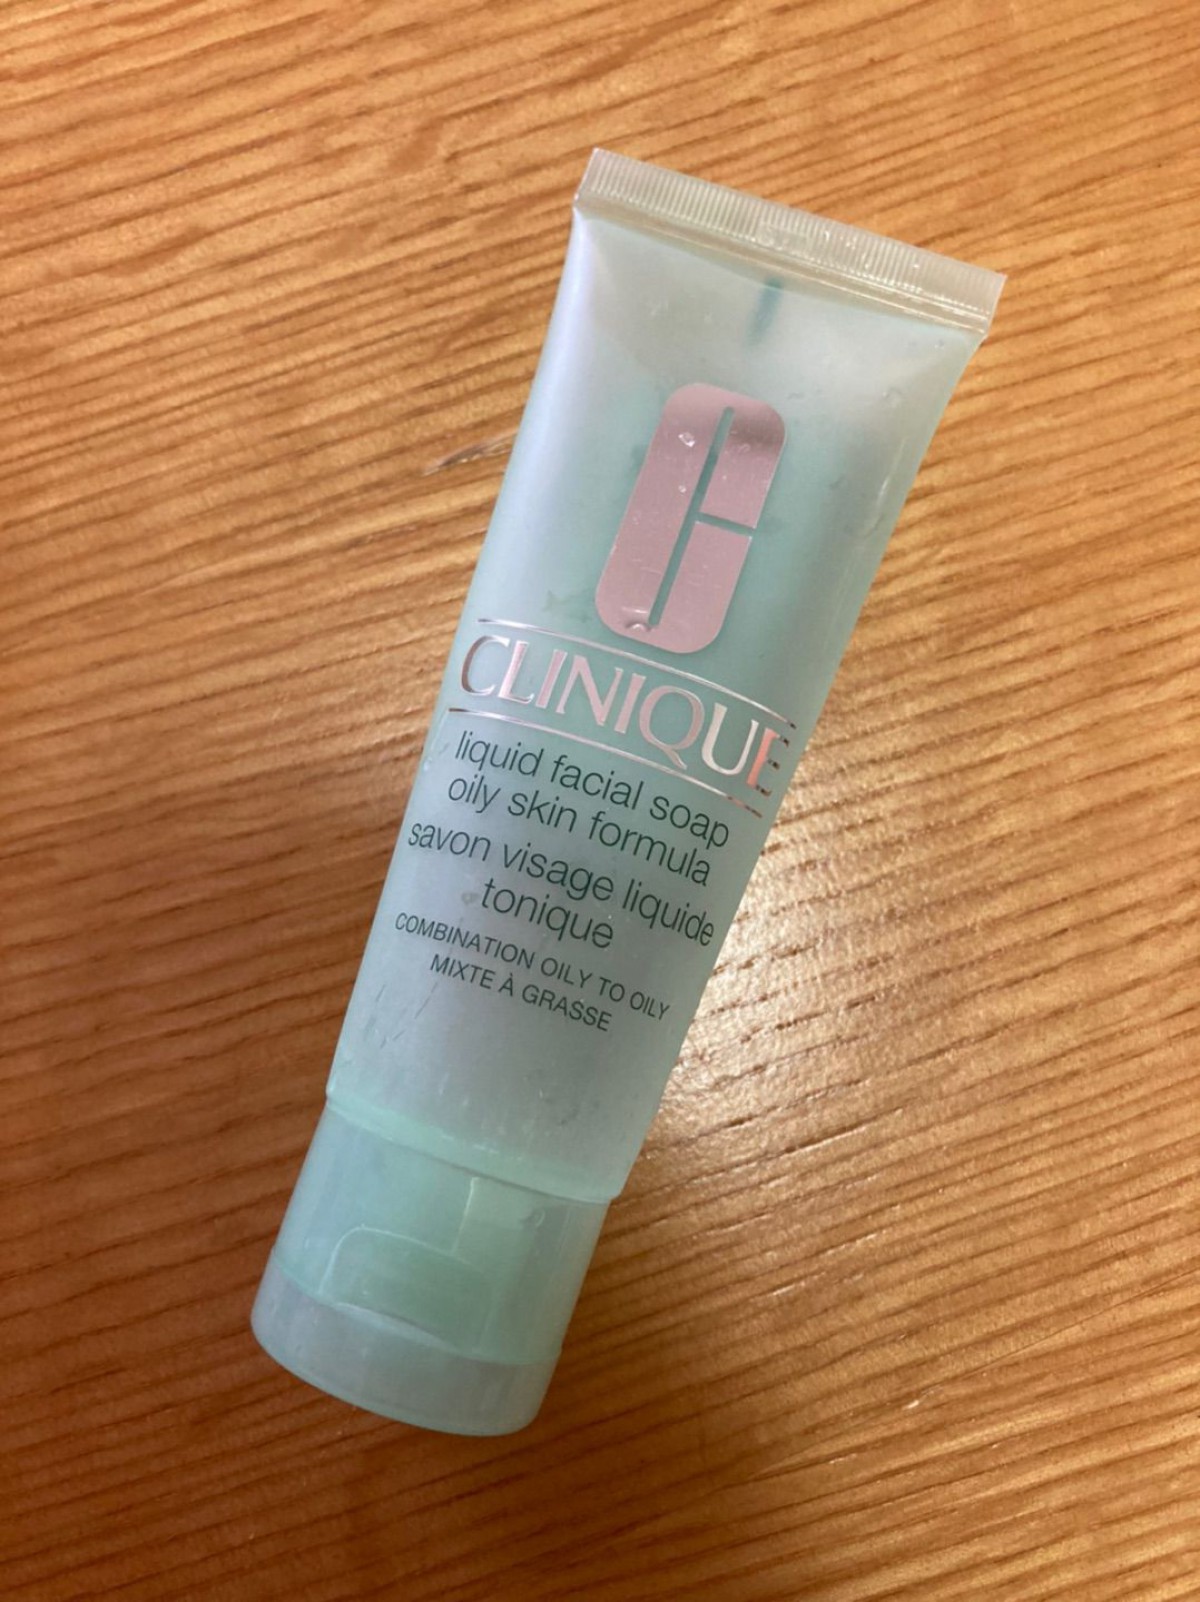 CLINIQUE＊リキッドフェーシャルソープ